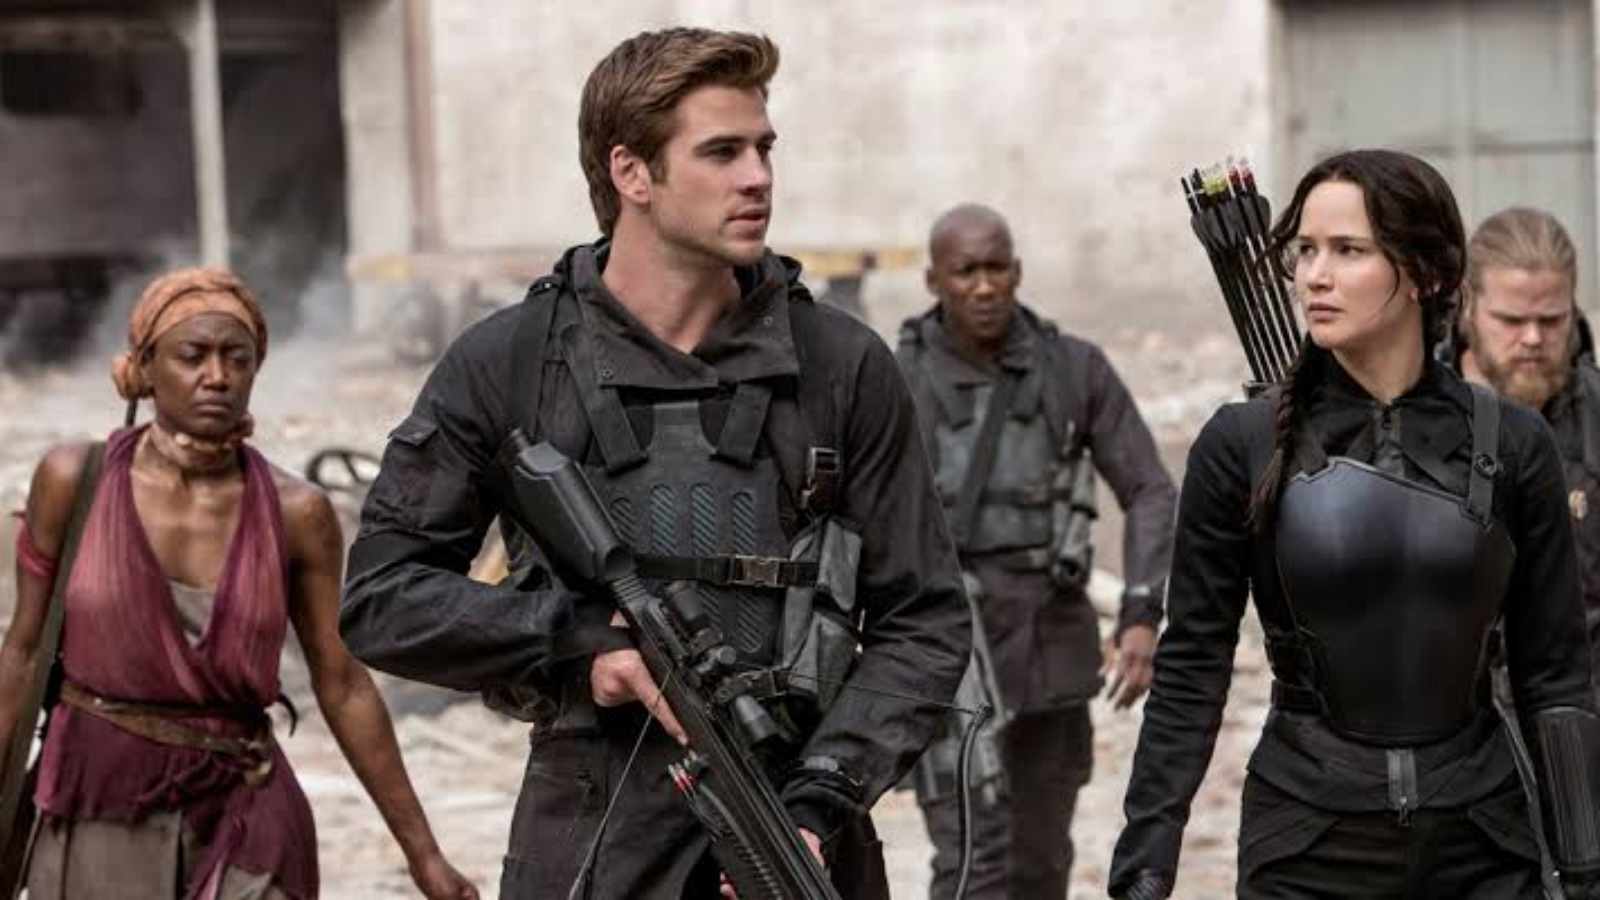 A still from the Hunger Games